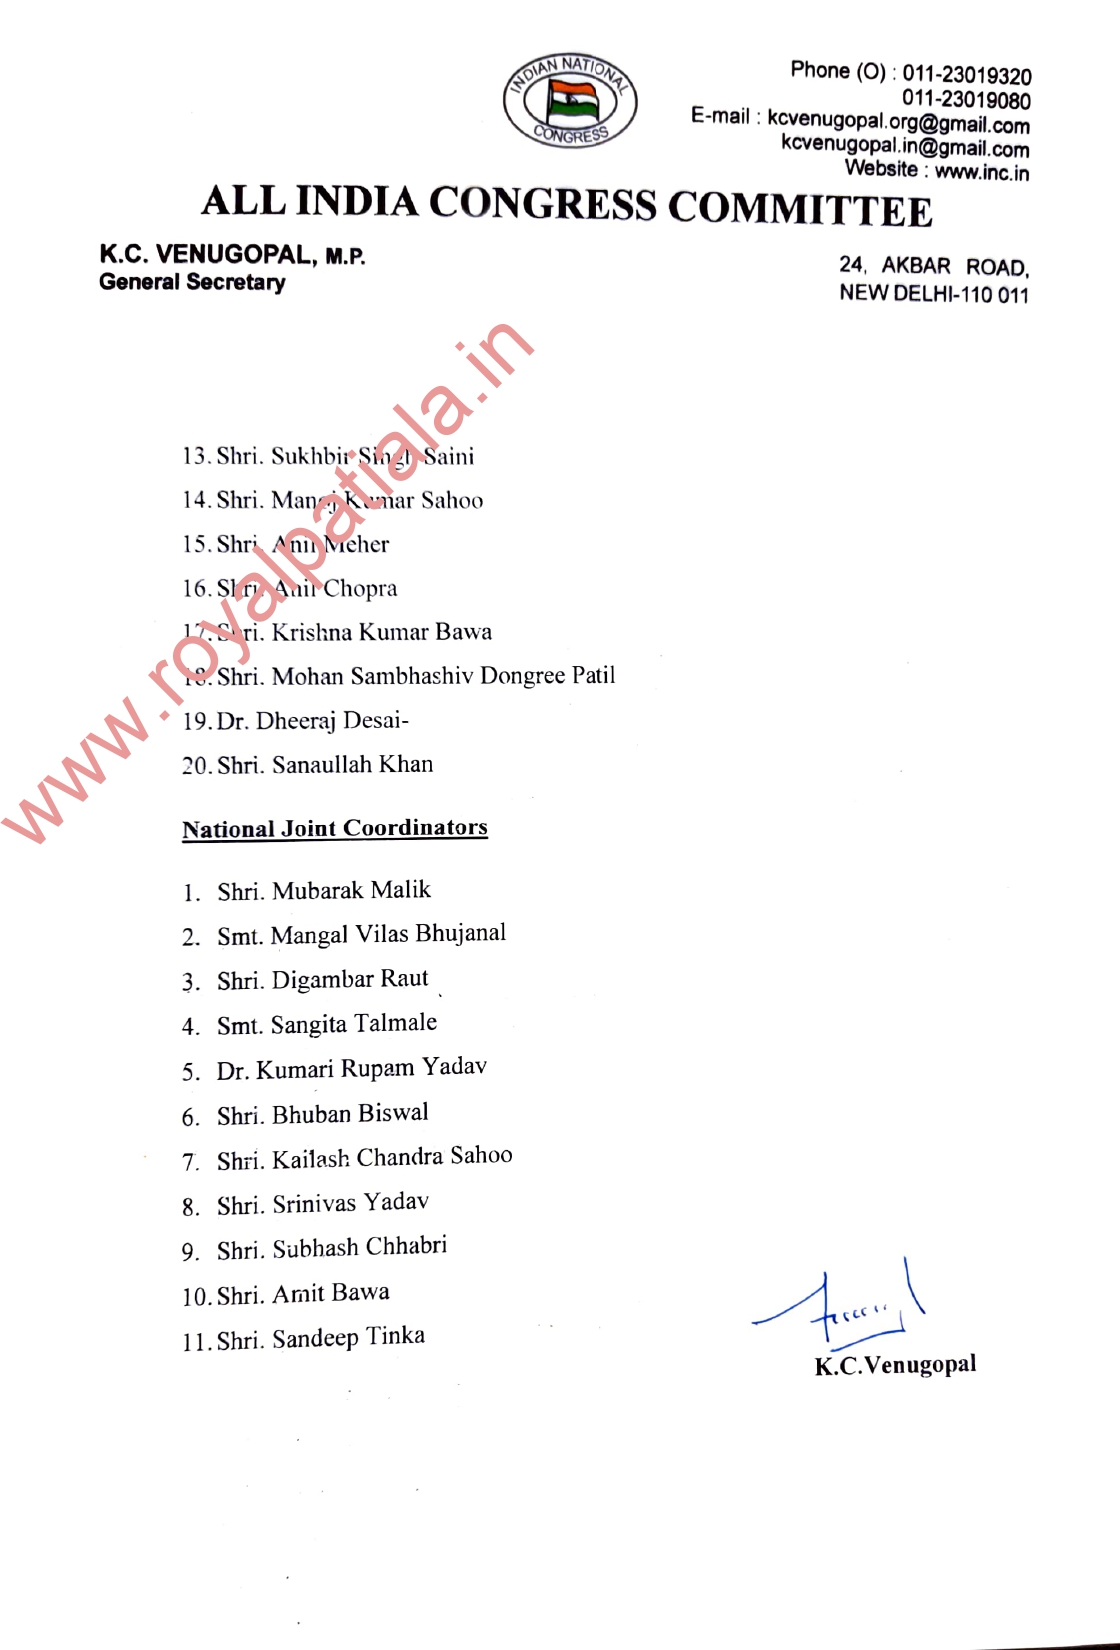 Congress appoints Punjab, Rajasthan, Uttrakhand state OBC chairman; 20 national coordinators